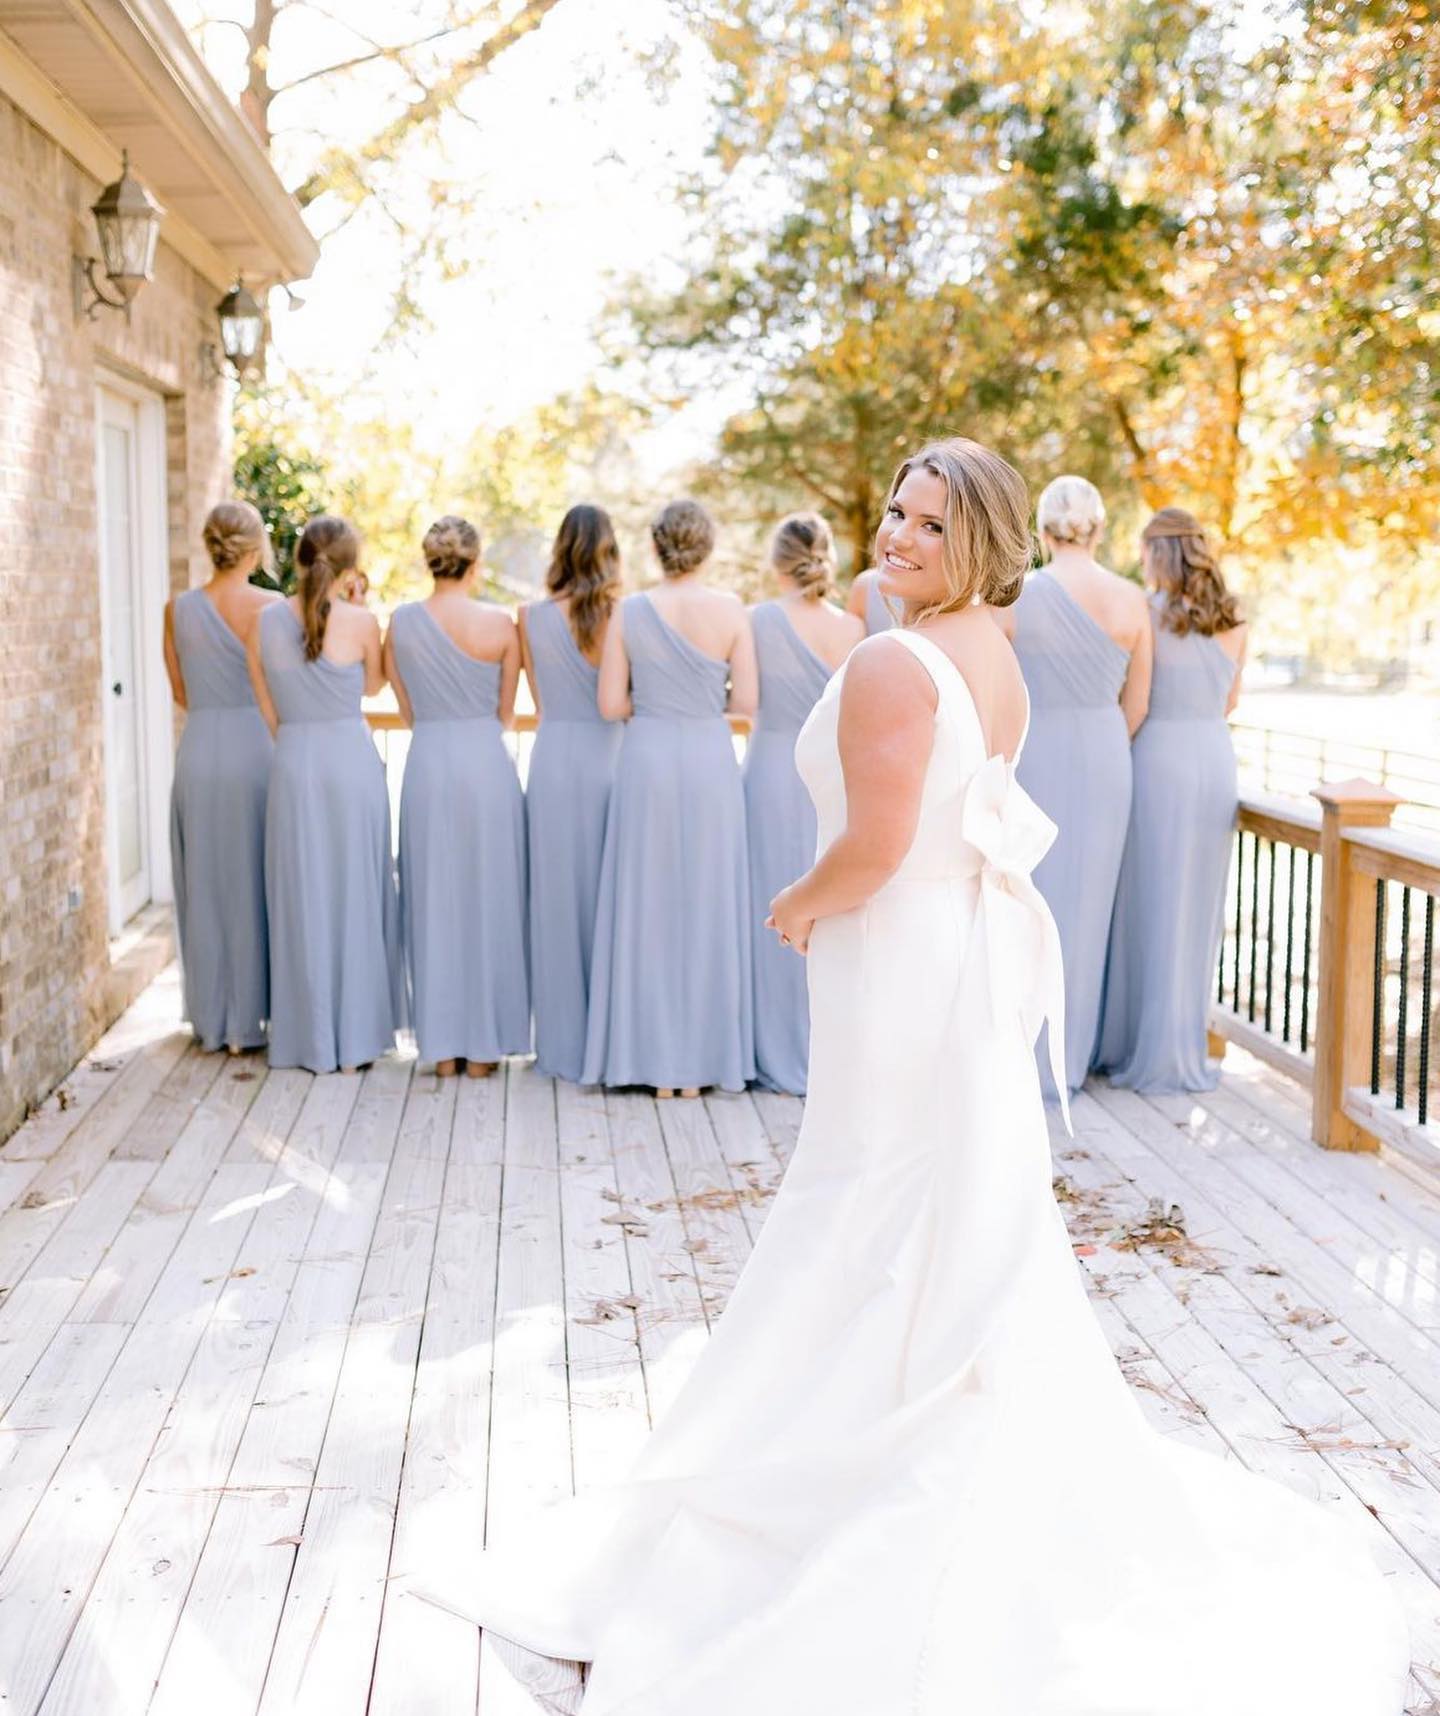 2022 Brides Are Keeping This Secret From Their Bridesmaids